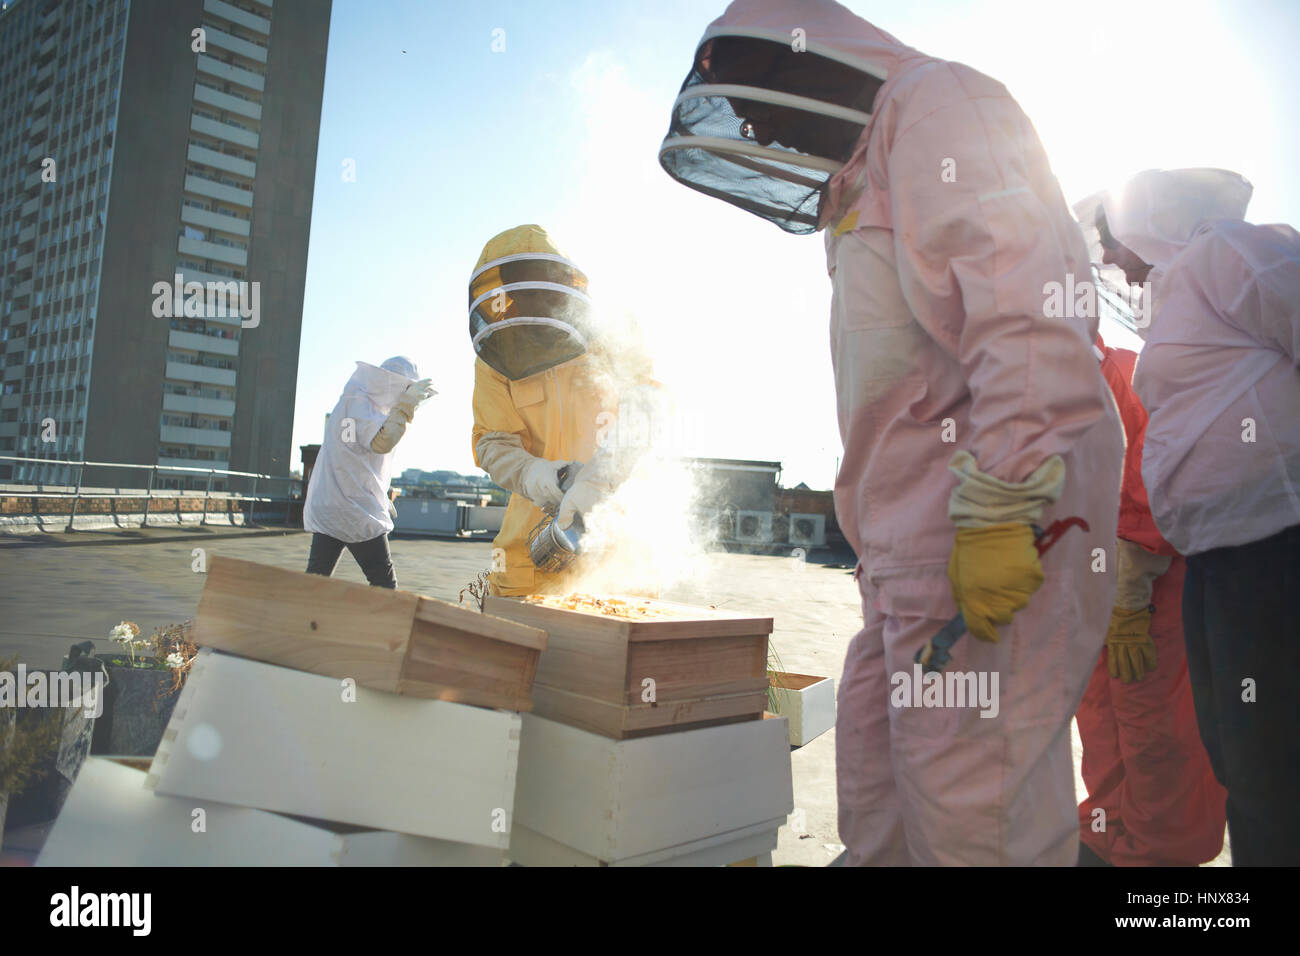 Male and female beekeepers using bee smoker on city rooftop Stock Photo